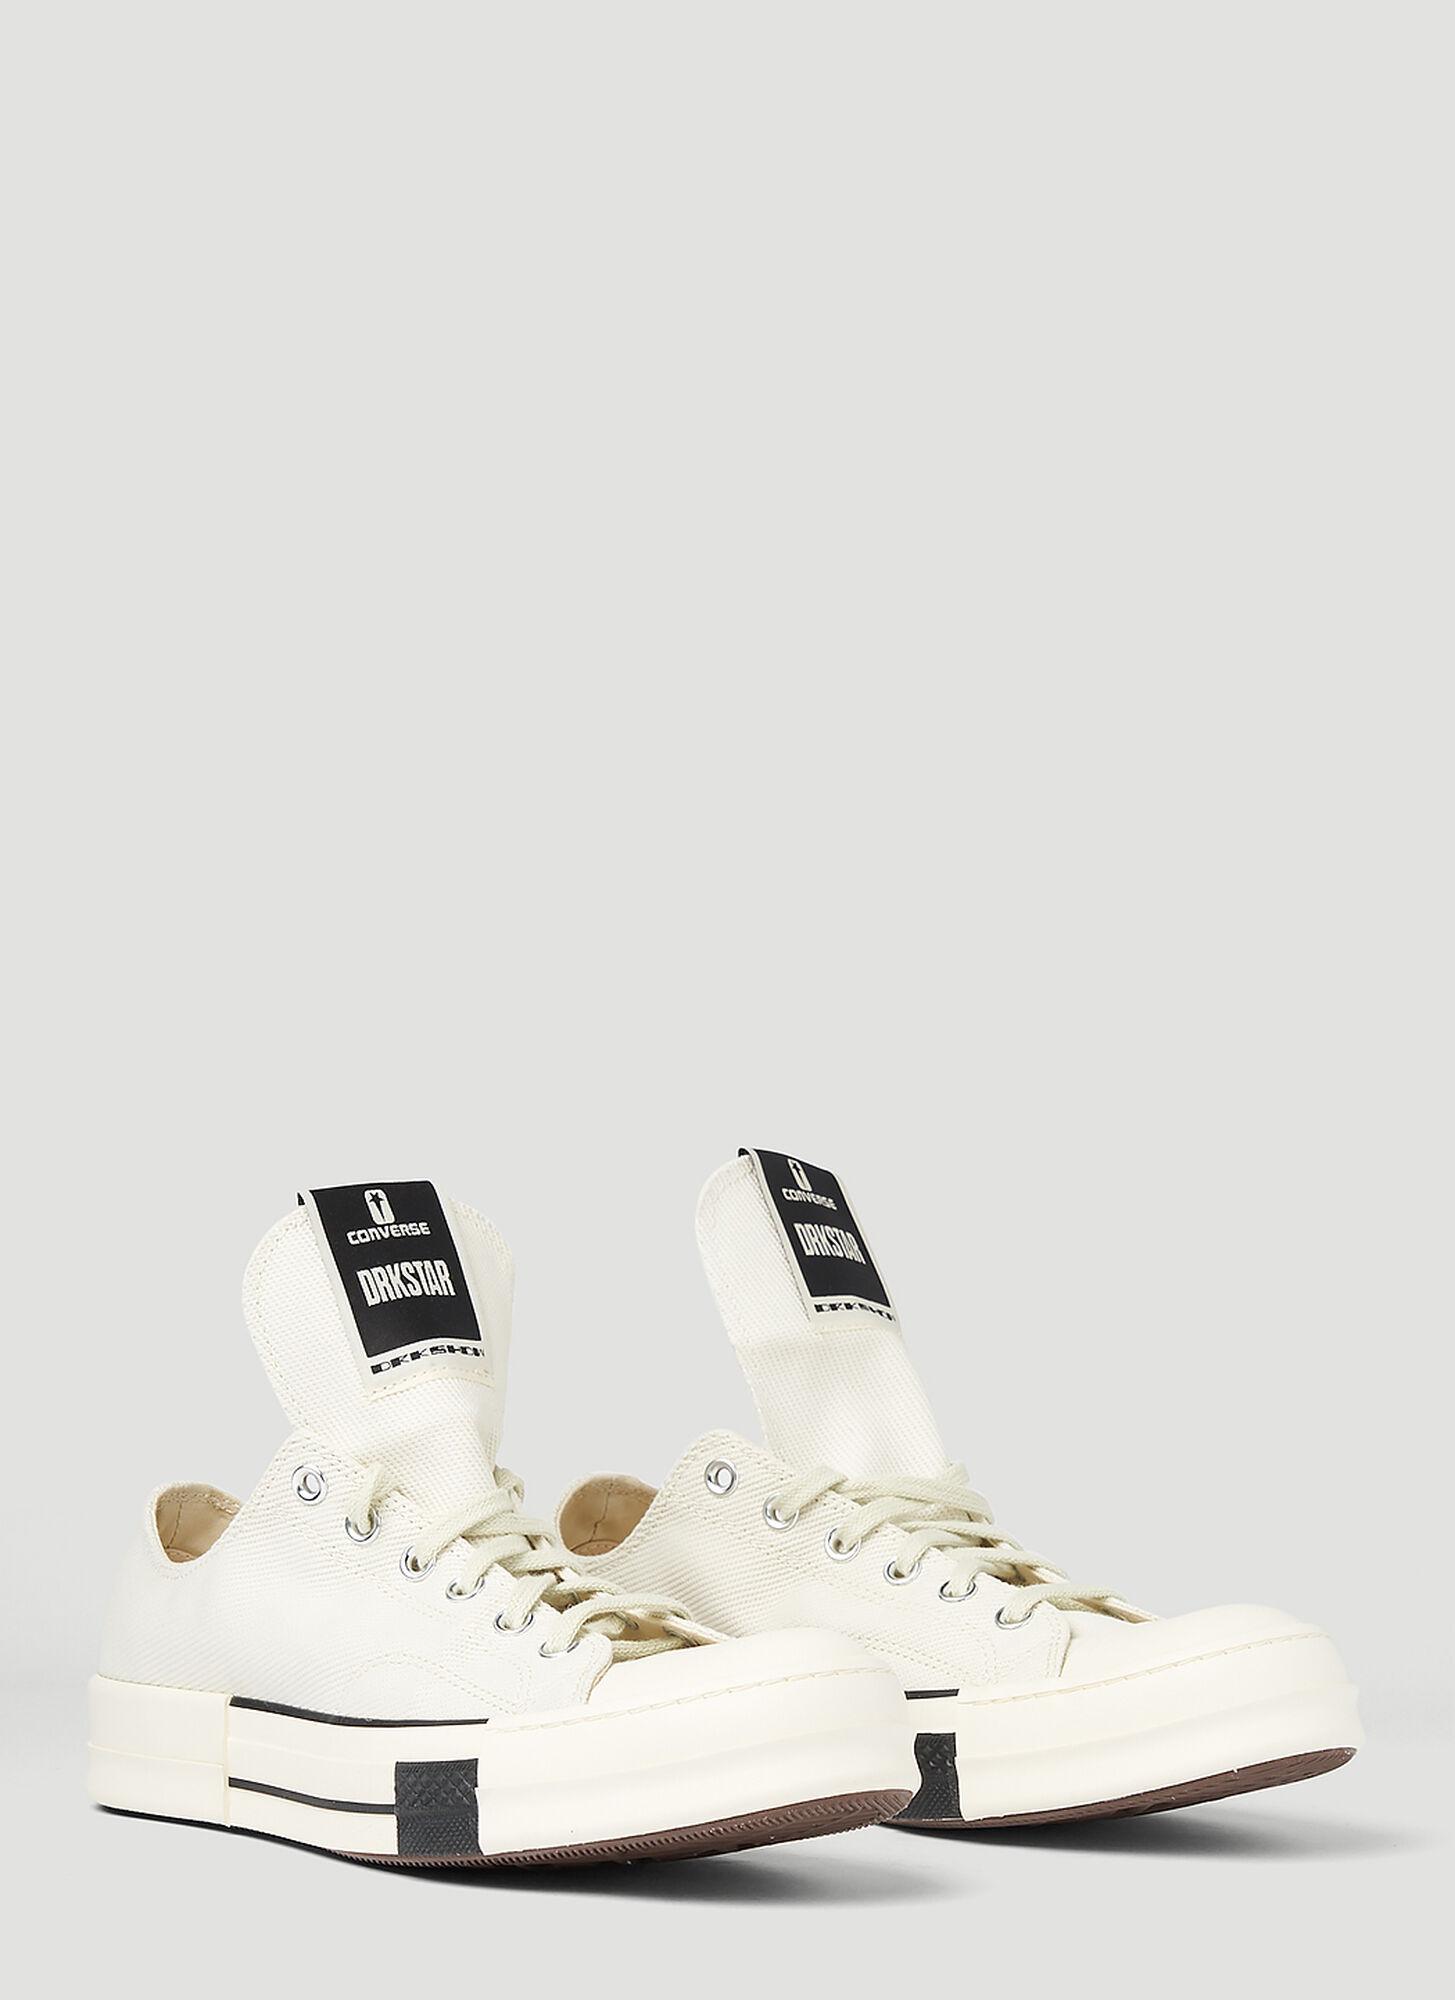 Rick Owens X Converse Drkstr Chuck 70 Low Top Sneakers in Natural | Lyst